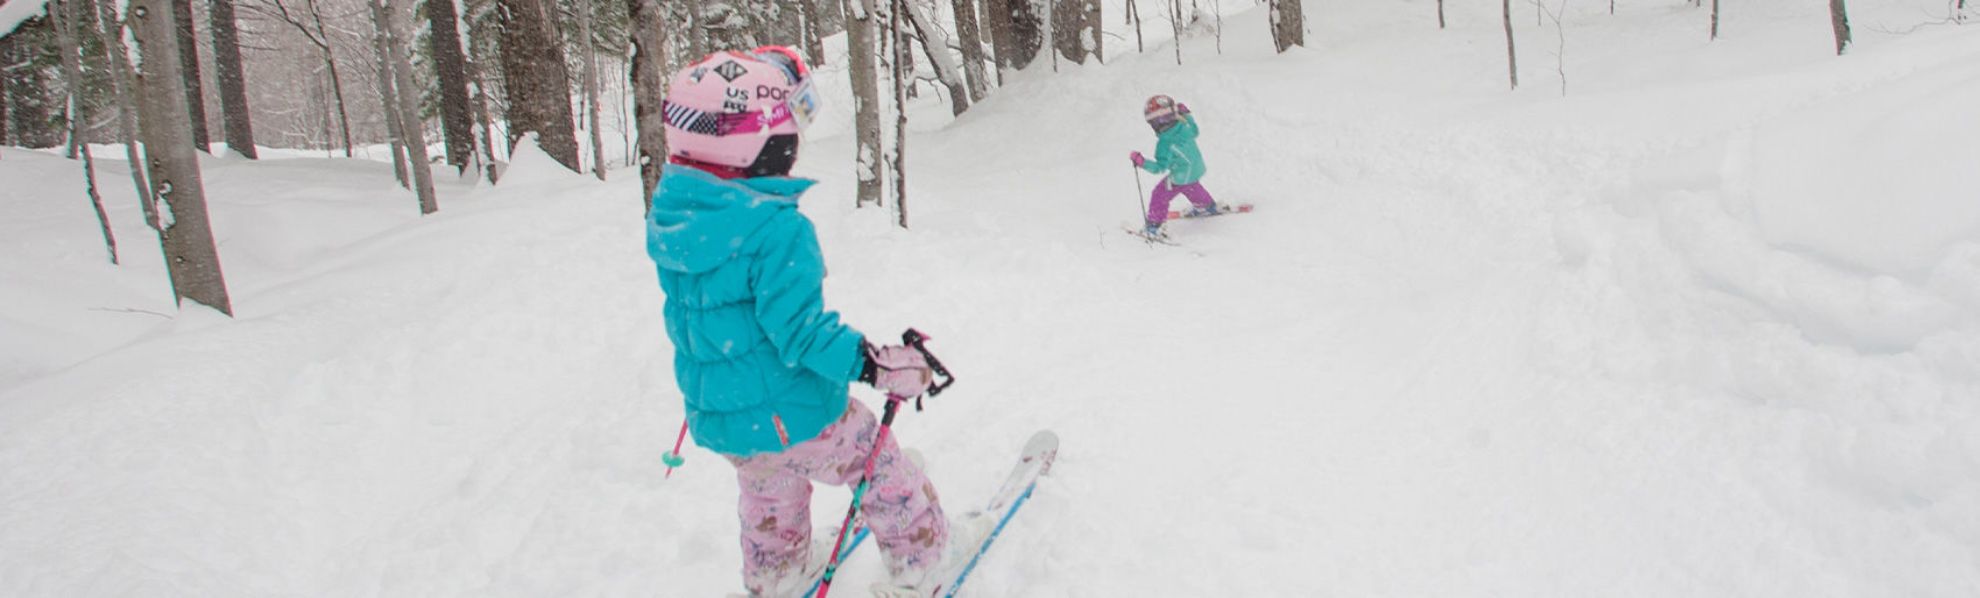 Kids skiing in glades.